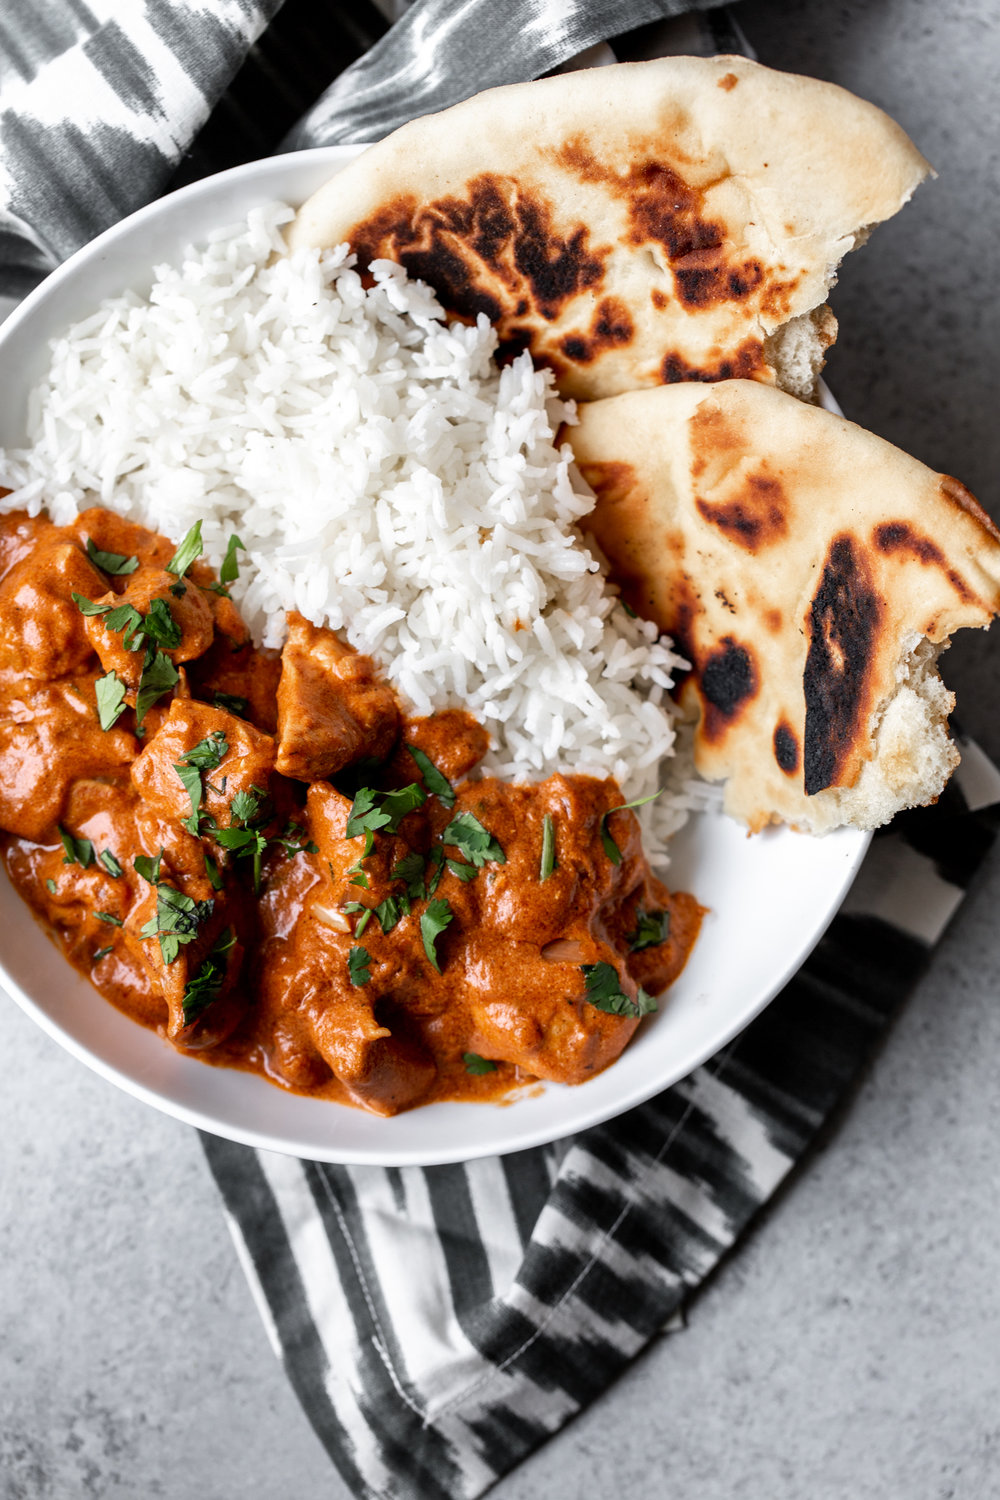 Indian butter chicken made with chicken breast simmered in a fragrant spiced tomato base finished with creamy yogurt and served with rice.